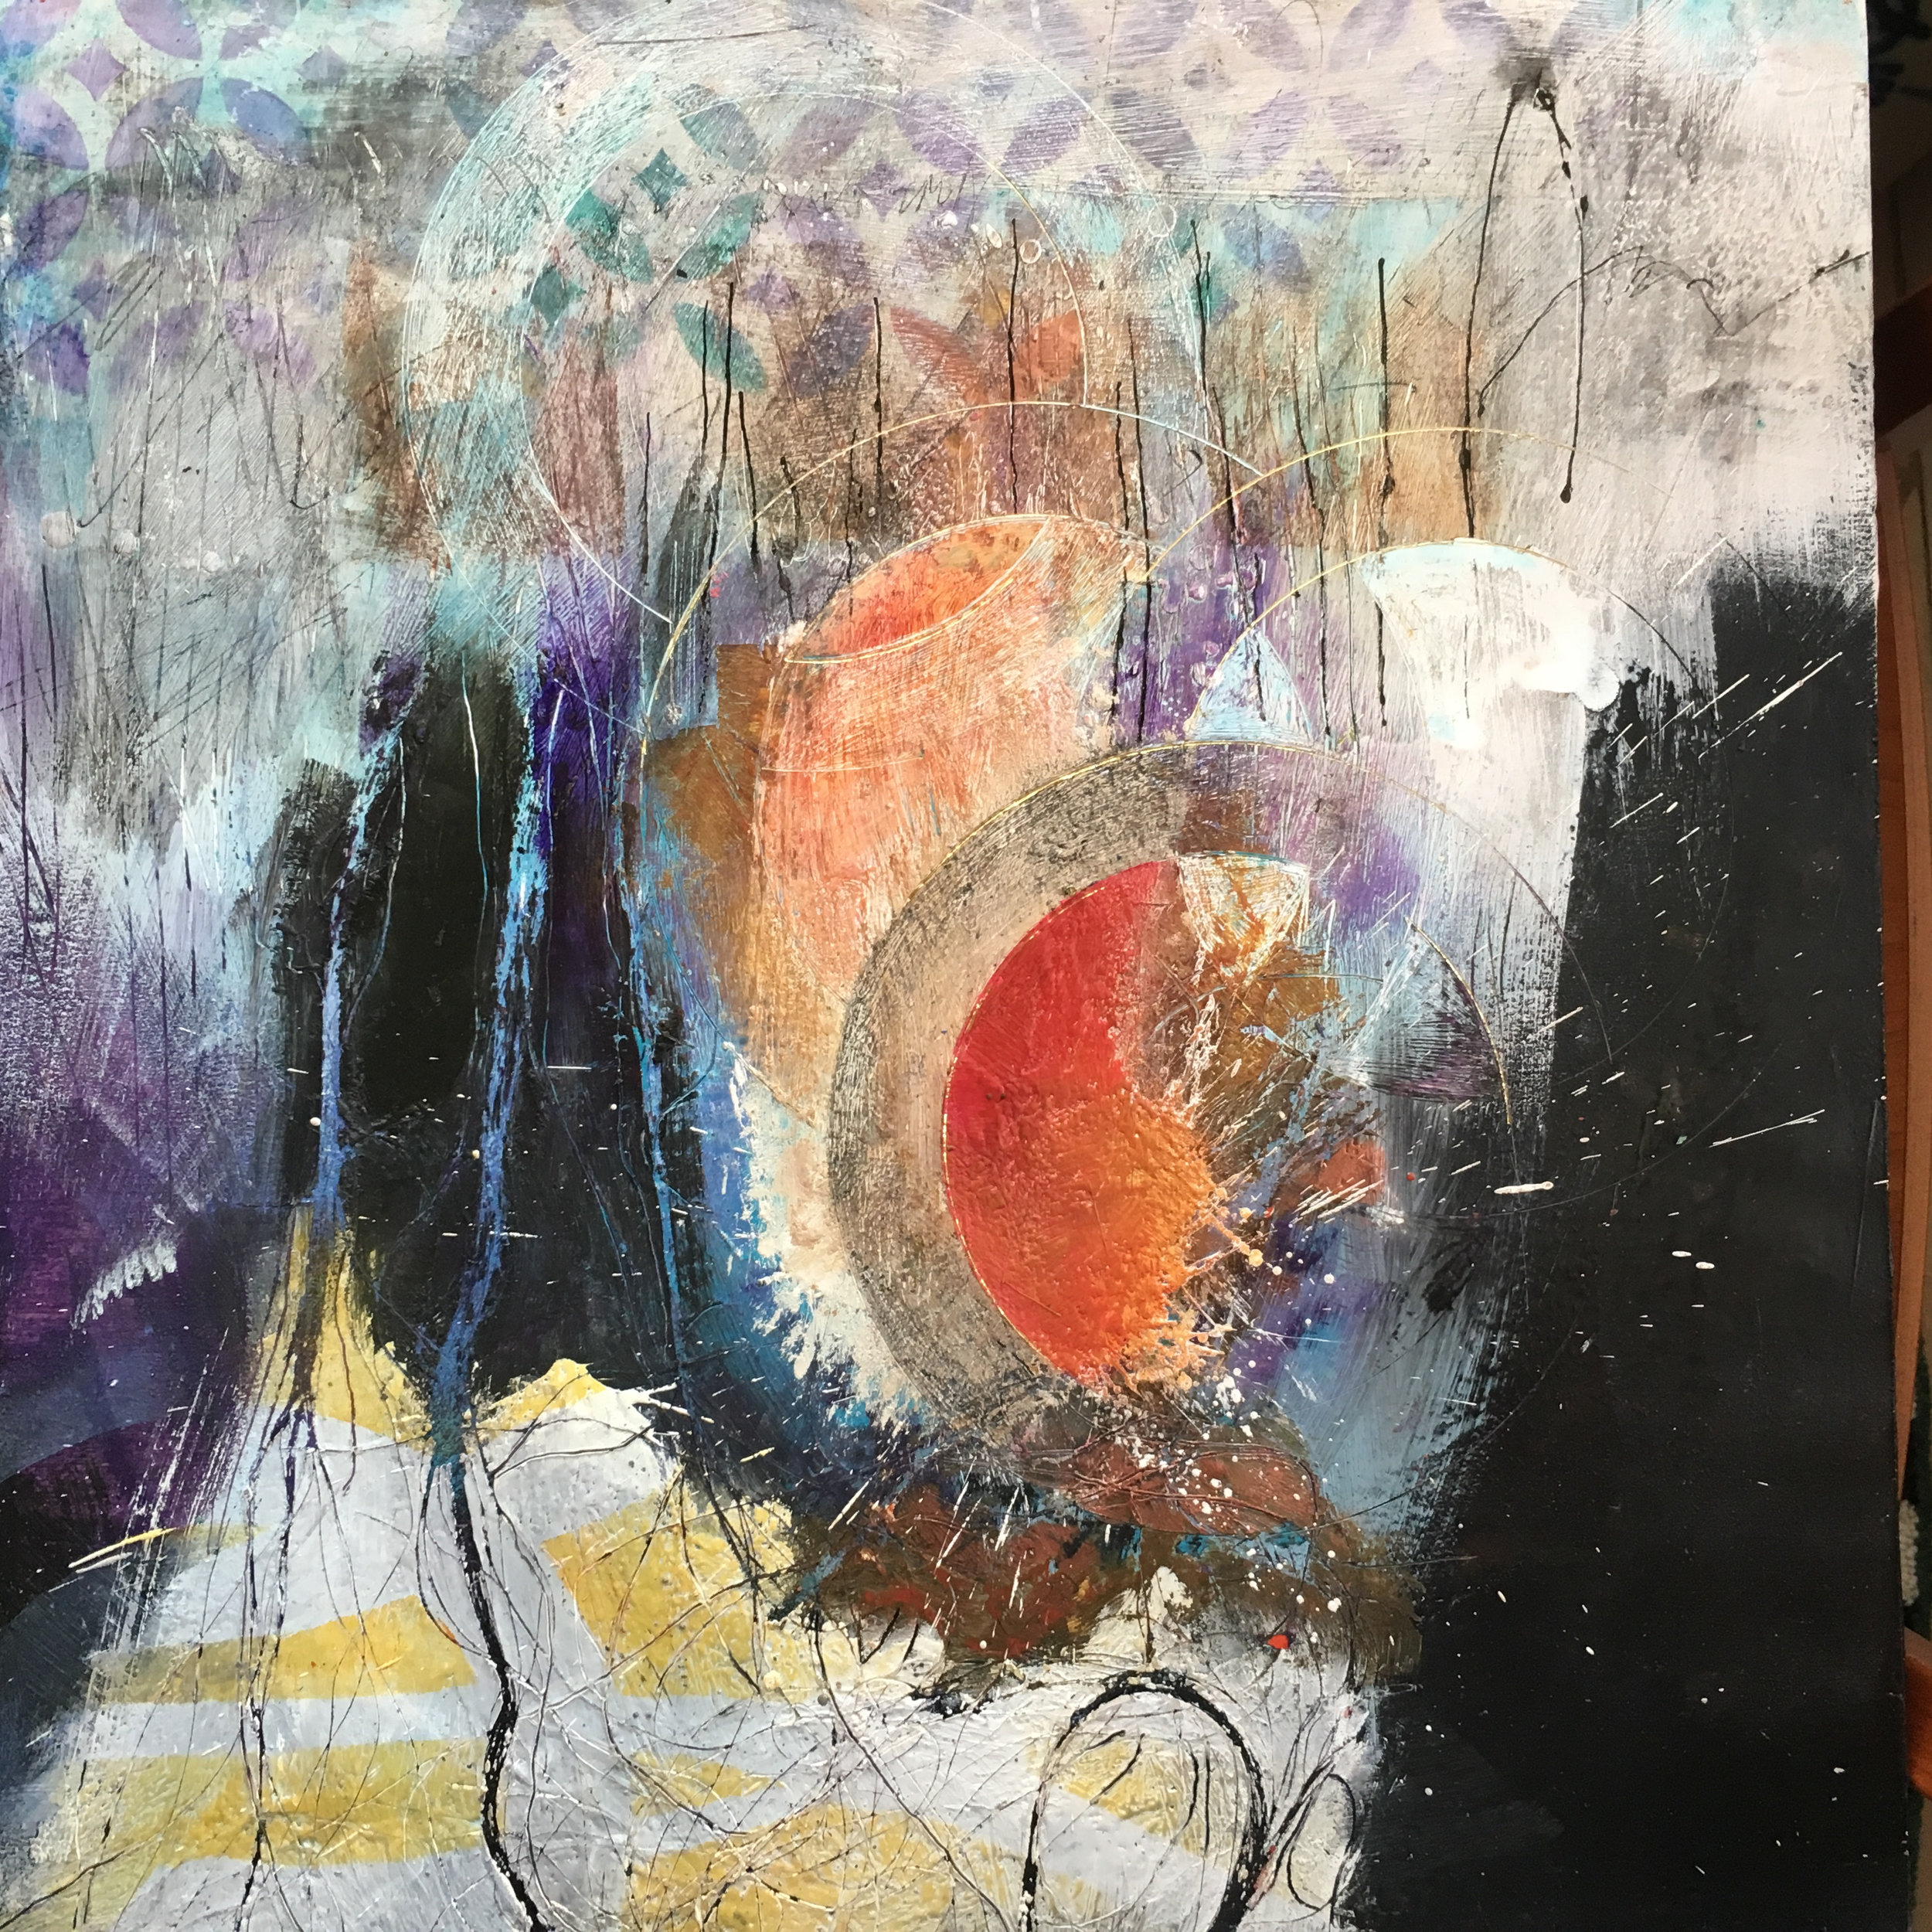  Mary Marley,  No Longer Holds,  Encaustic Paint 